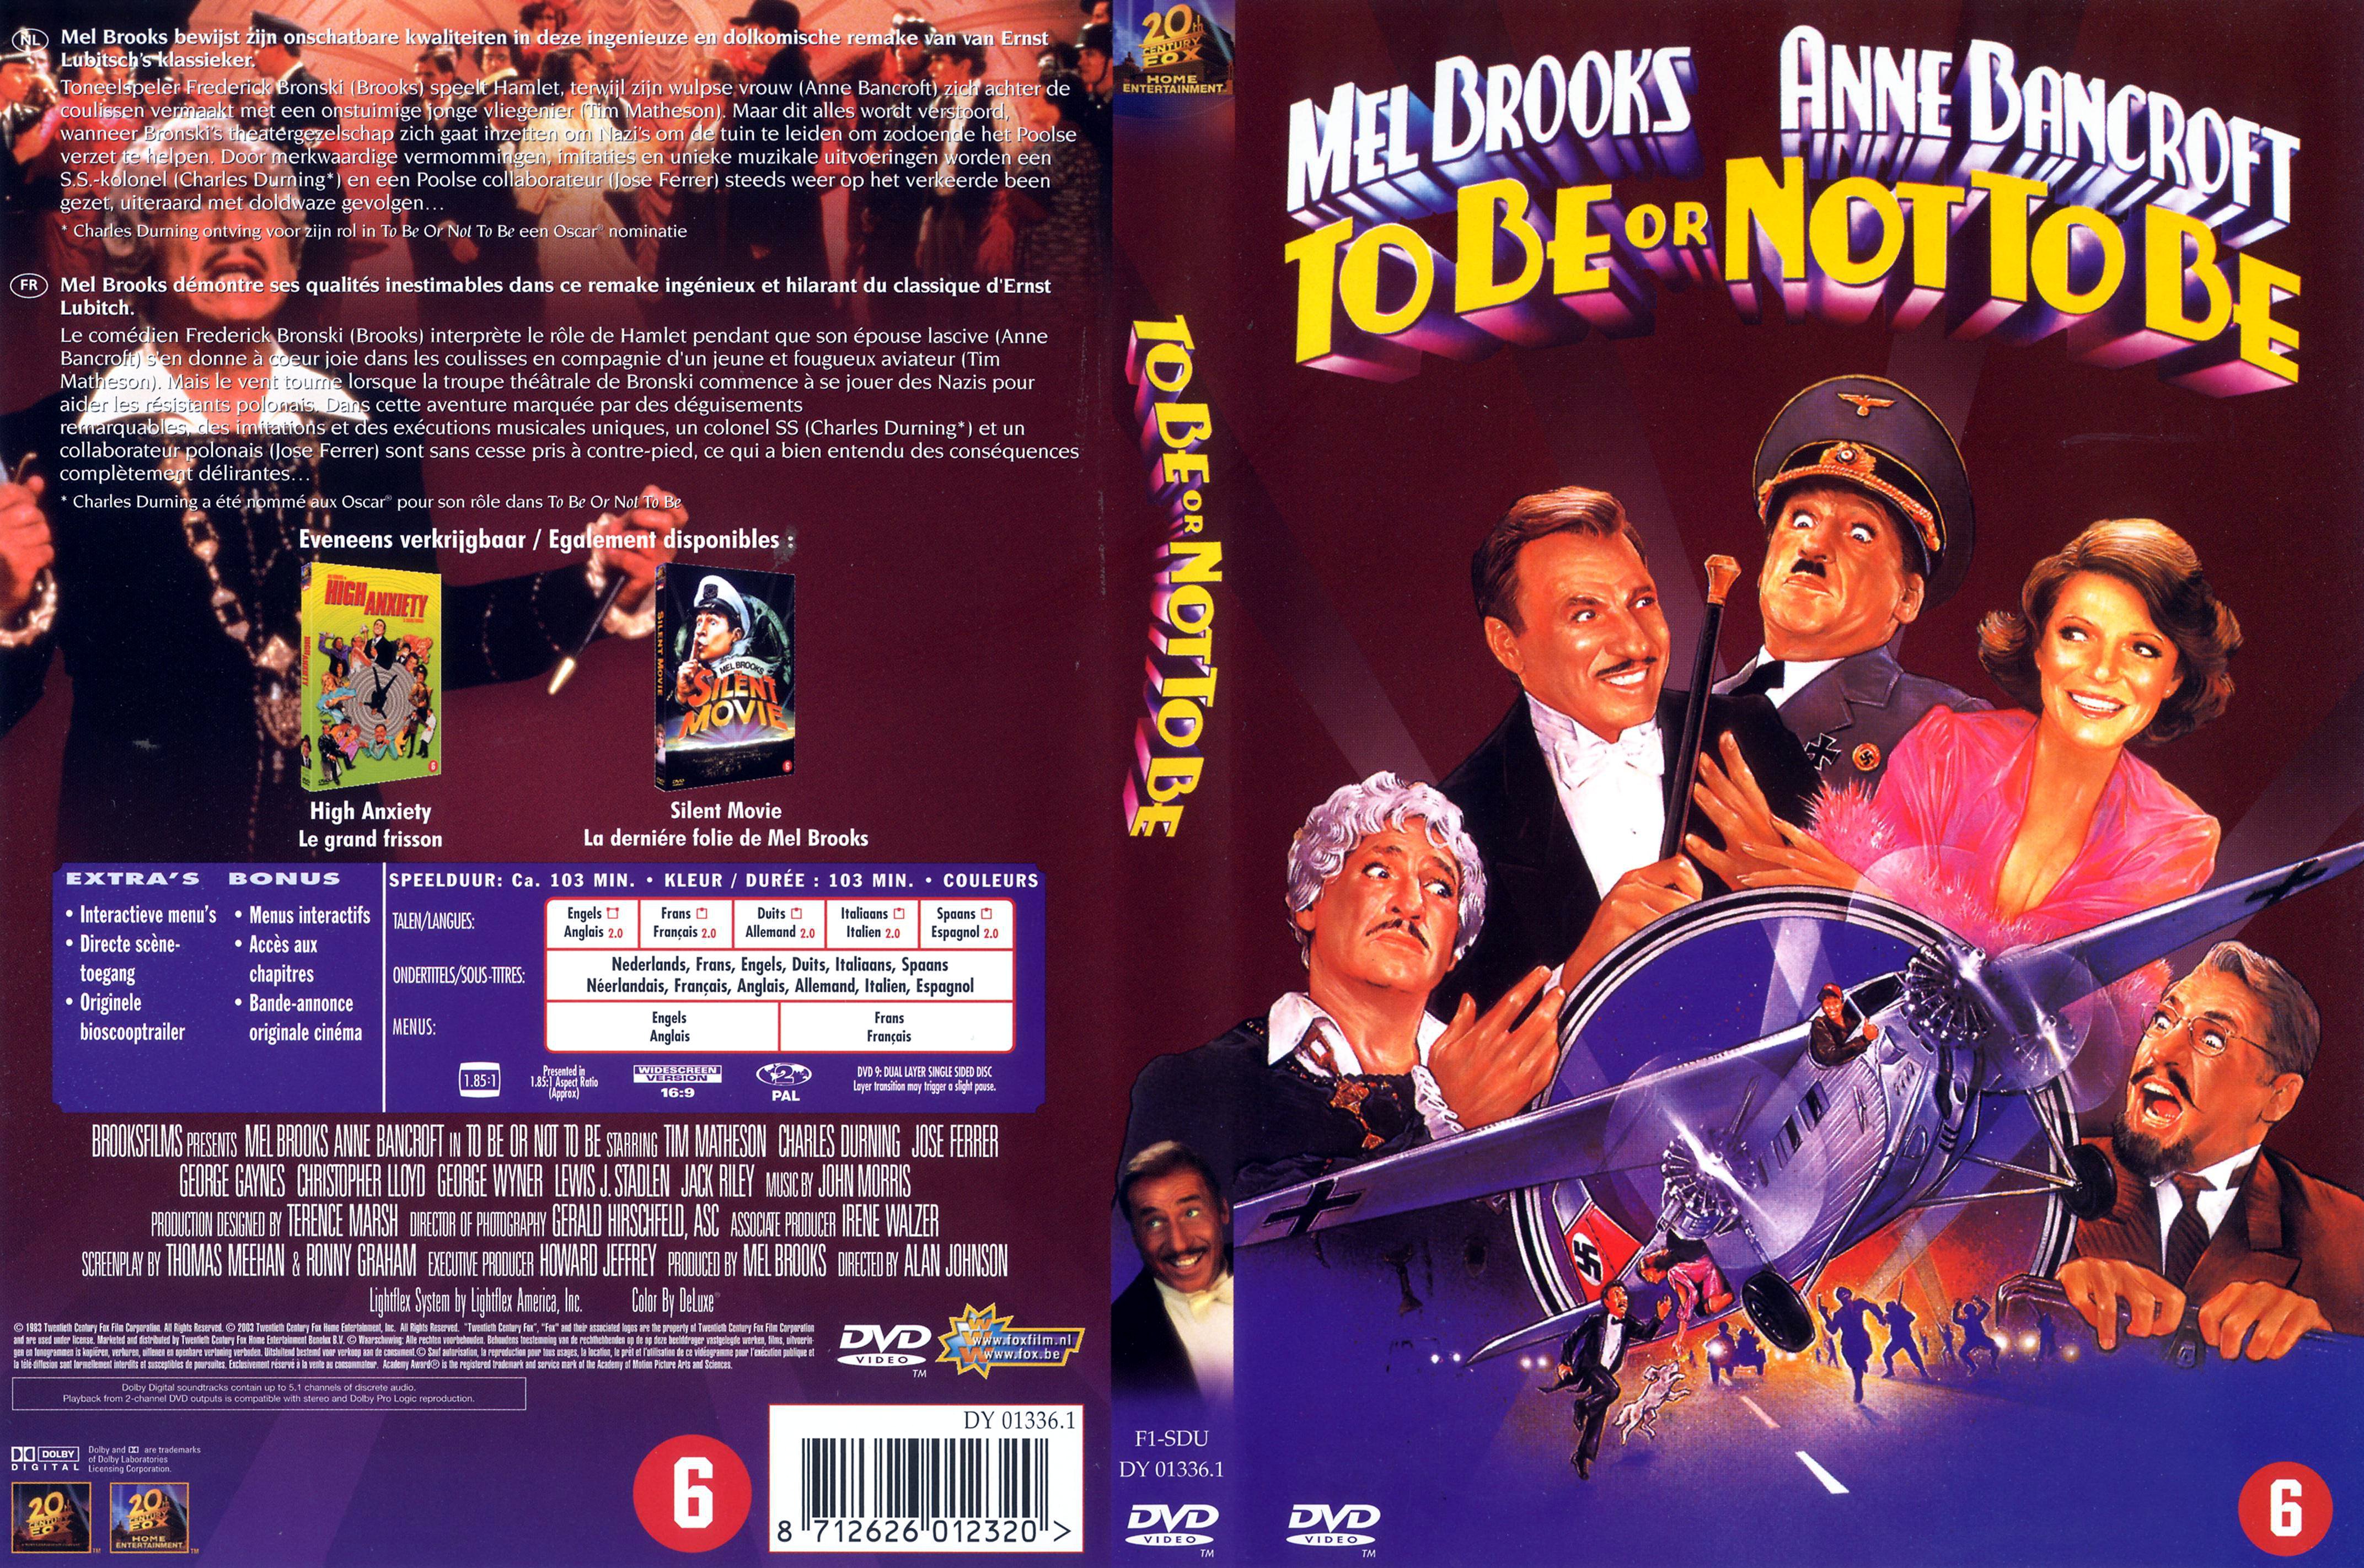 Jaquette DVD To be or not to be (Mel Brooks)